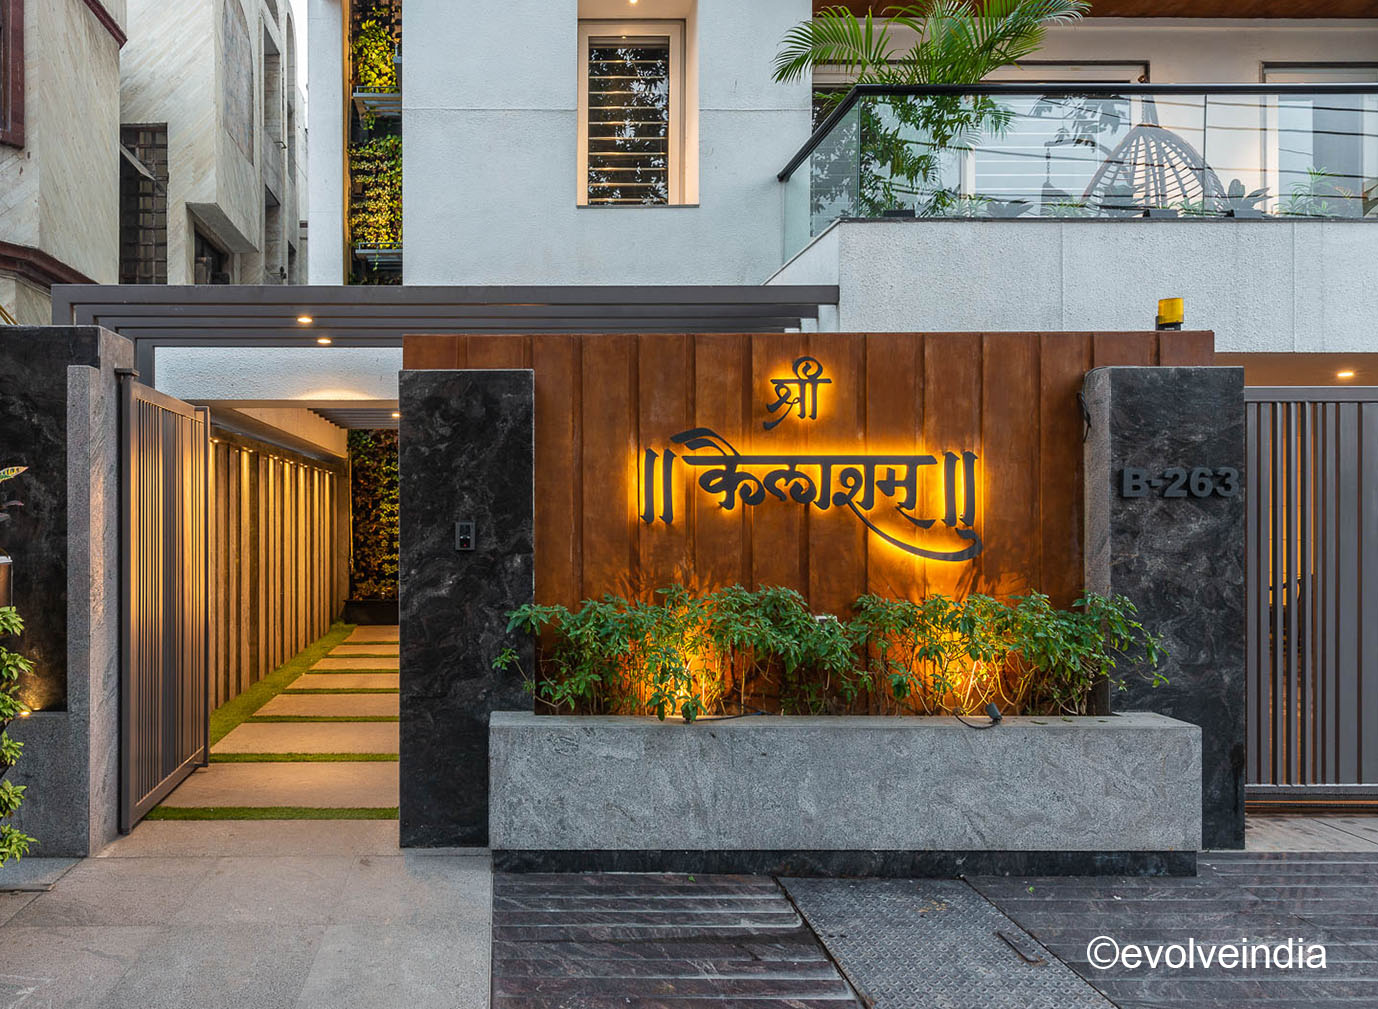 Exterior Wall Texture Design of A Residential Space done by Evolve India using rust textured finishes